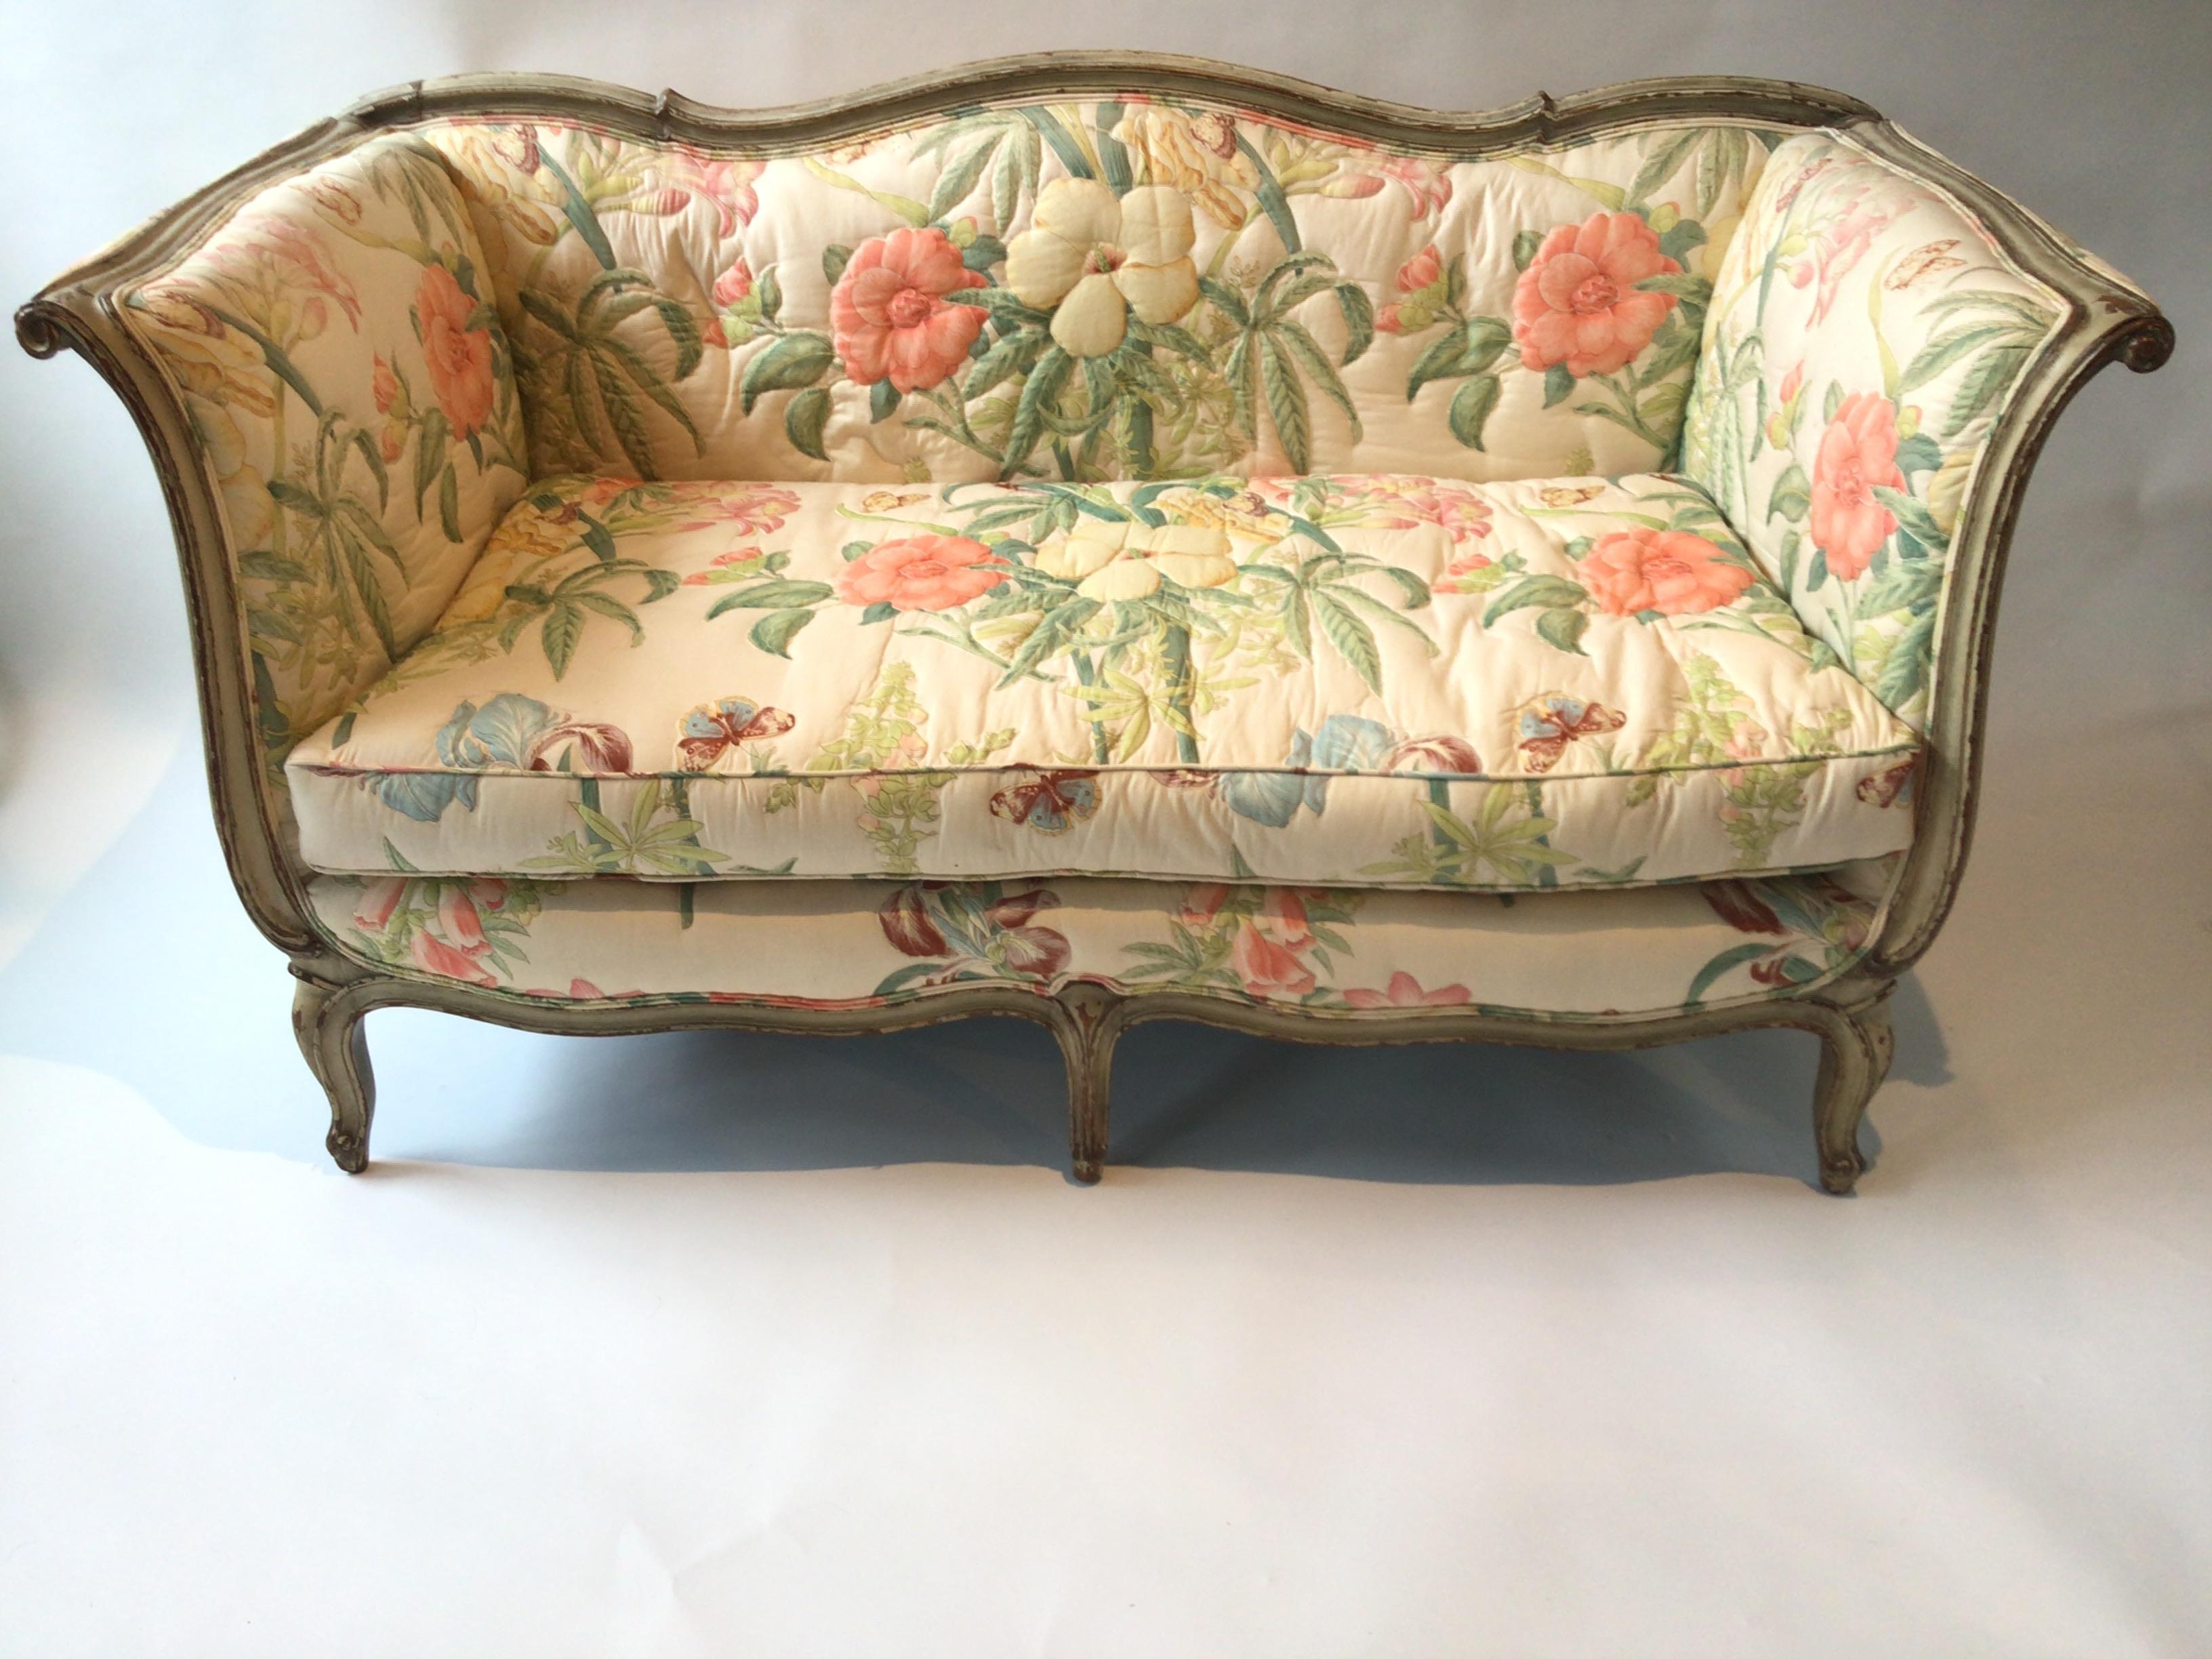 1930s French painted wood settee. Paint missing in areas. Needs reupholstering. Purchased from a Southampton, NY estate.
The fabric is now dirtier than it is in the pictures. Needs reupholstering.